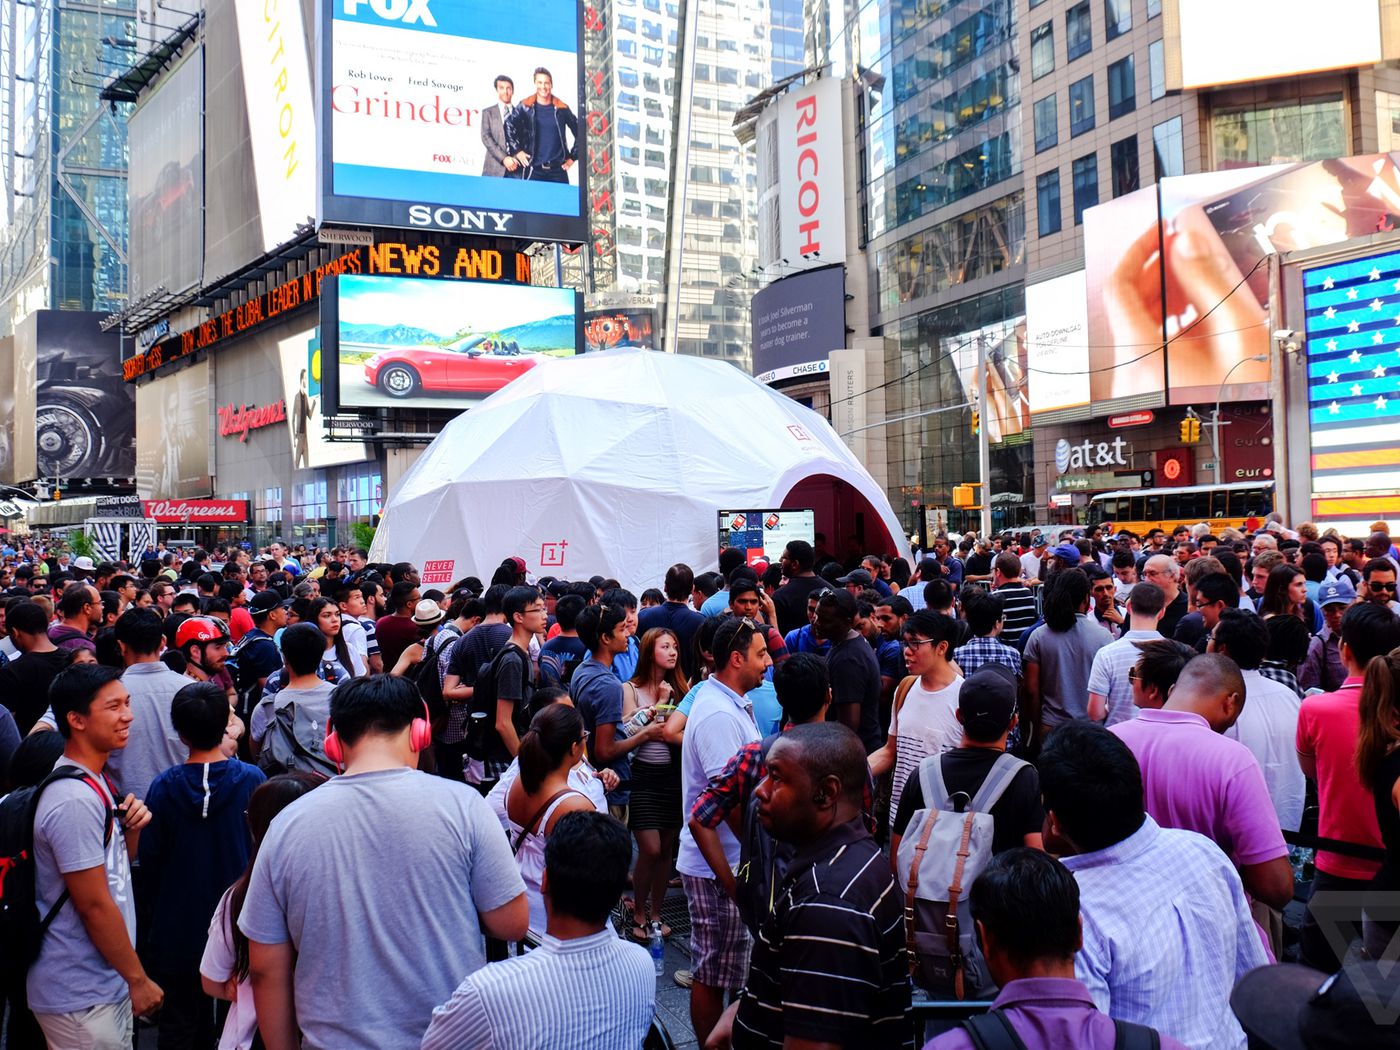 OnePlus draws a crowd in Times Square - The Verge